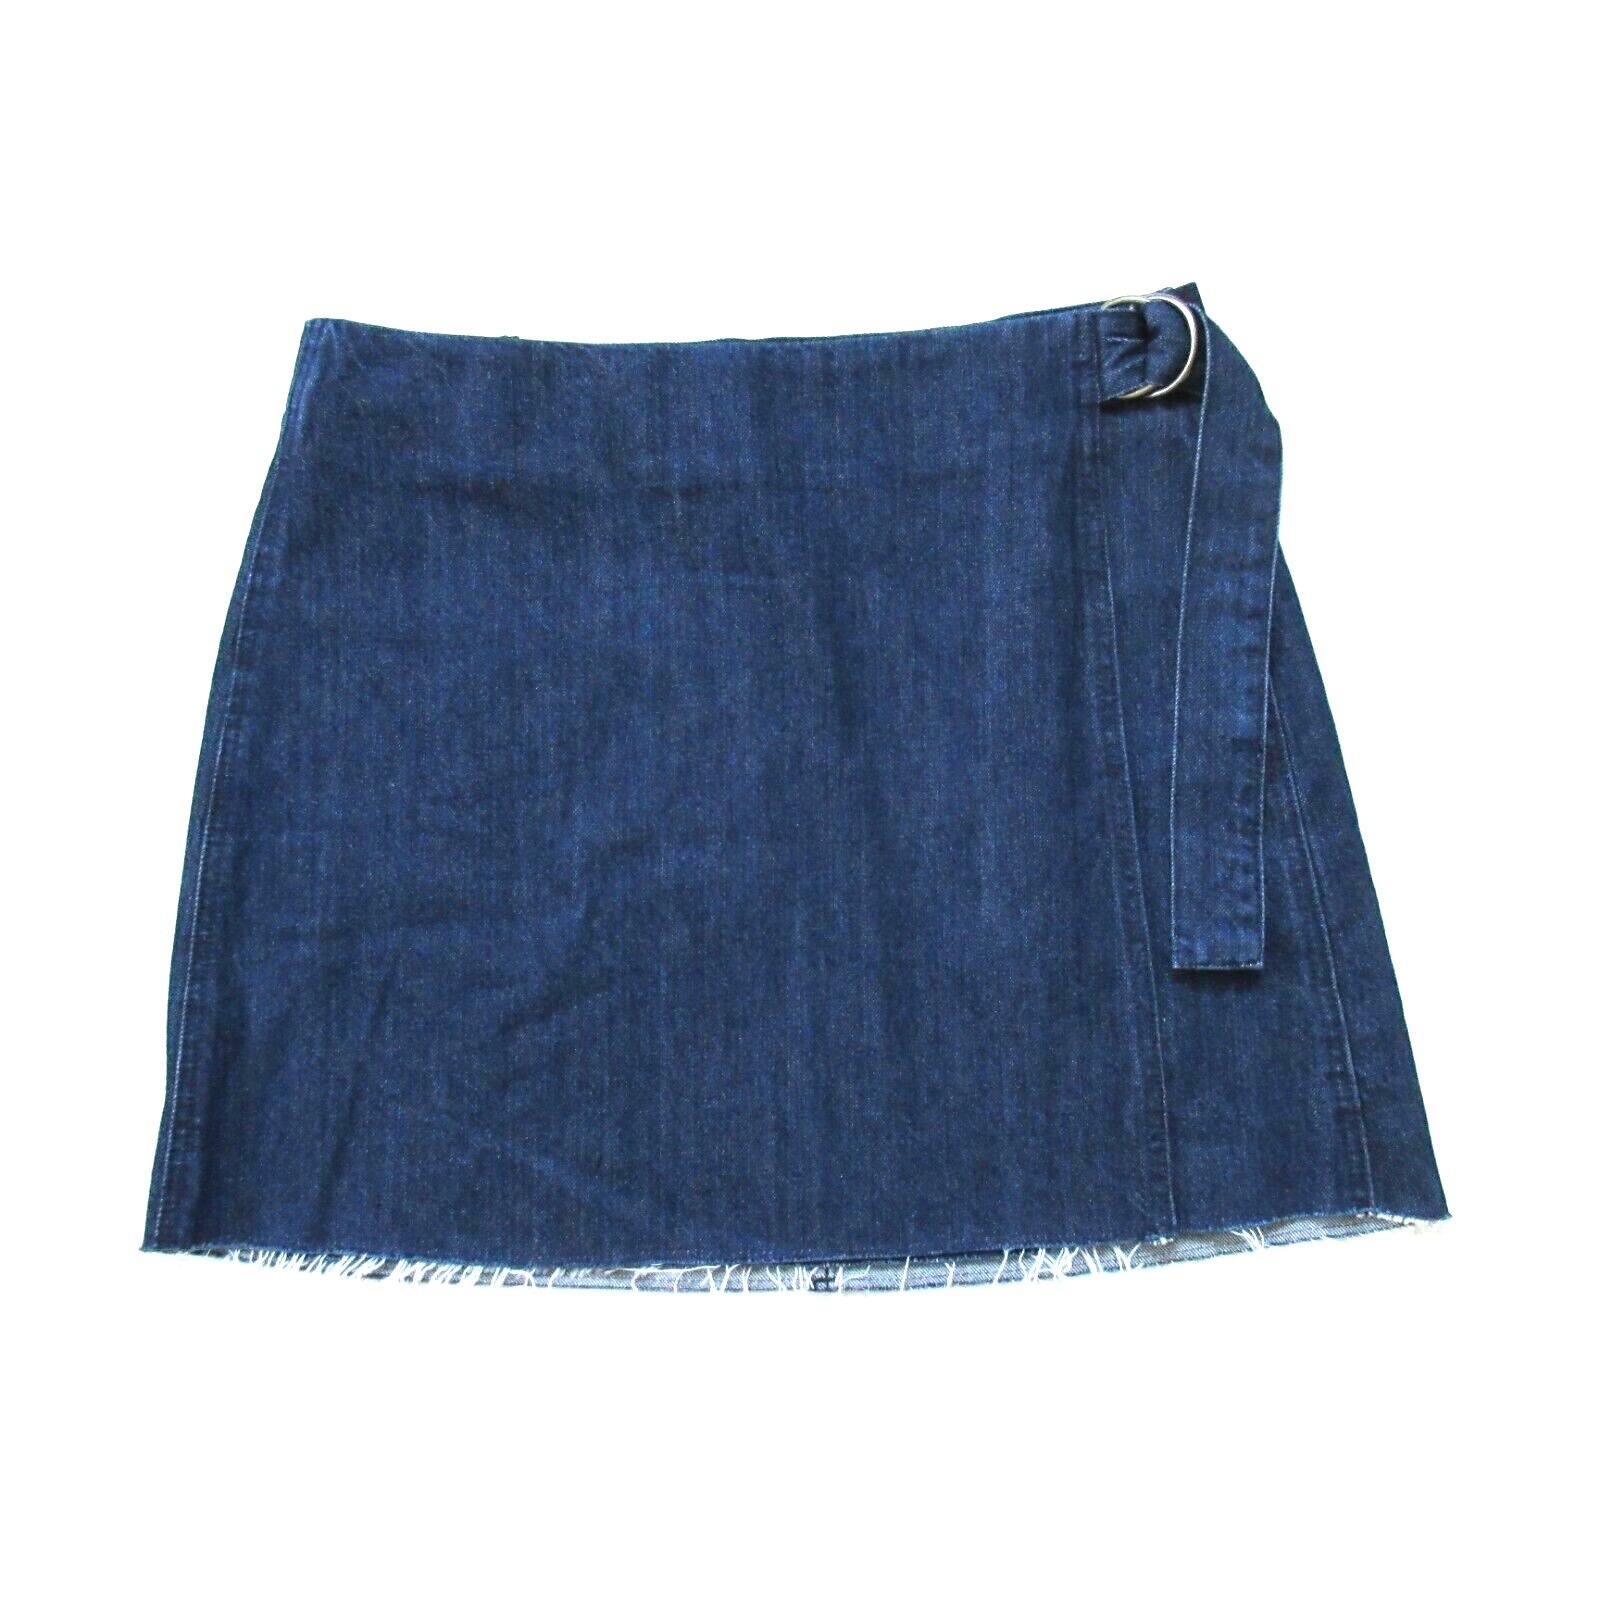 Primary image for NWT Madewell Denim Raw-Hem Mini Wrap Skirt in Smithe Wash Belted 10 $88